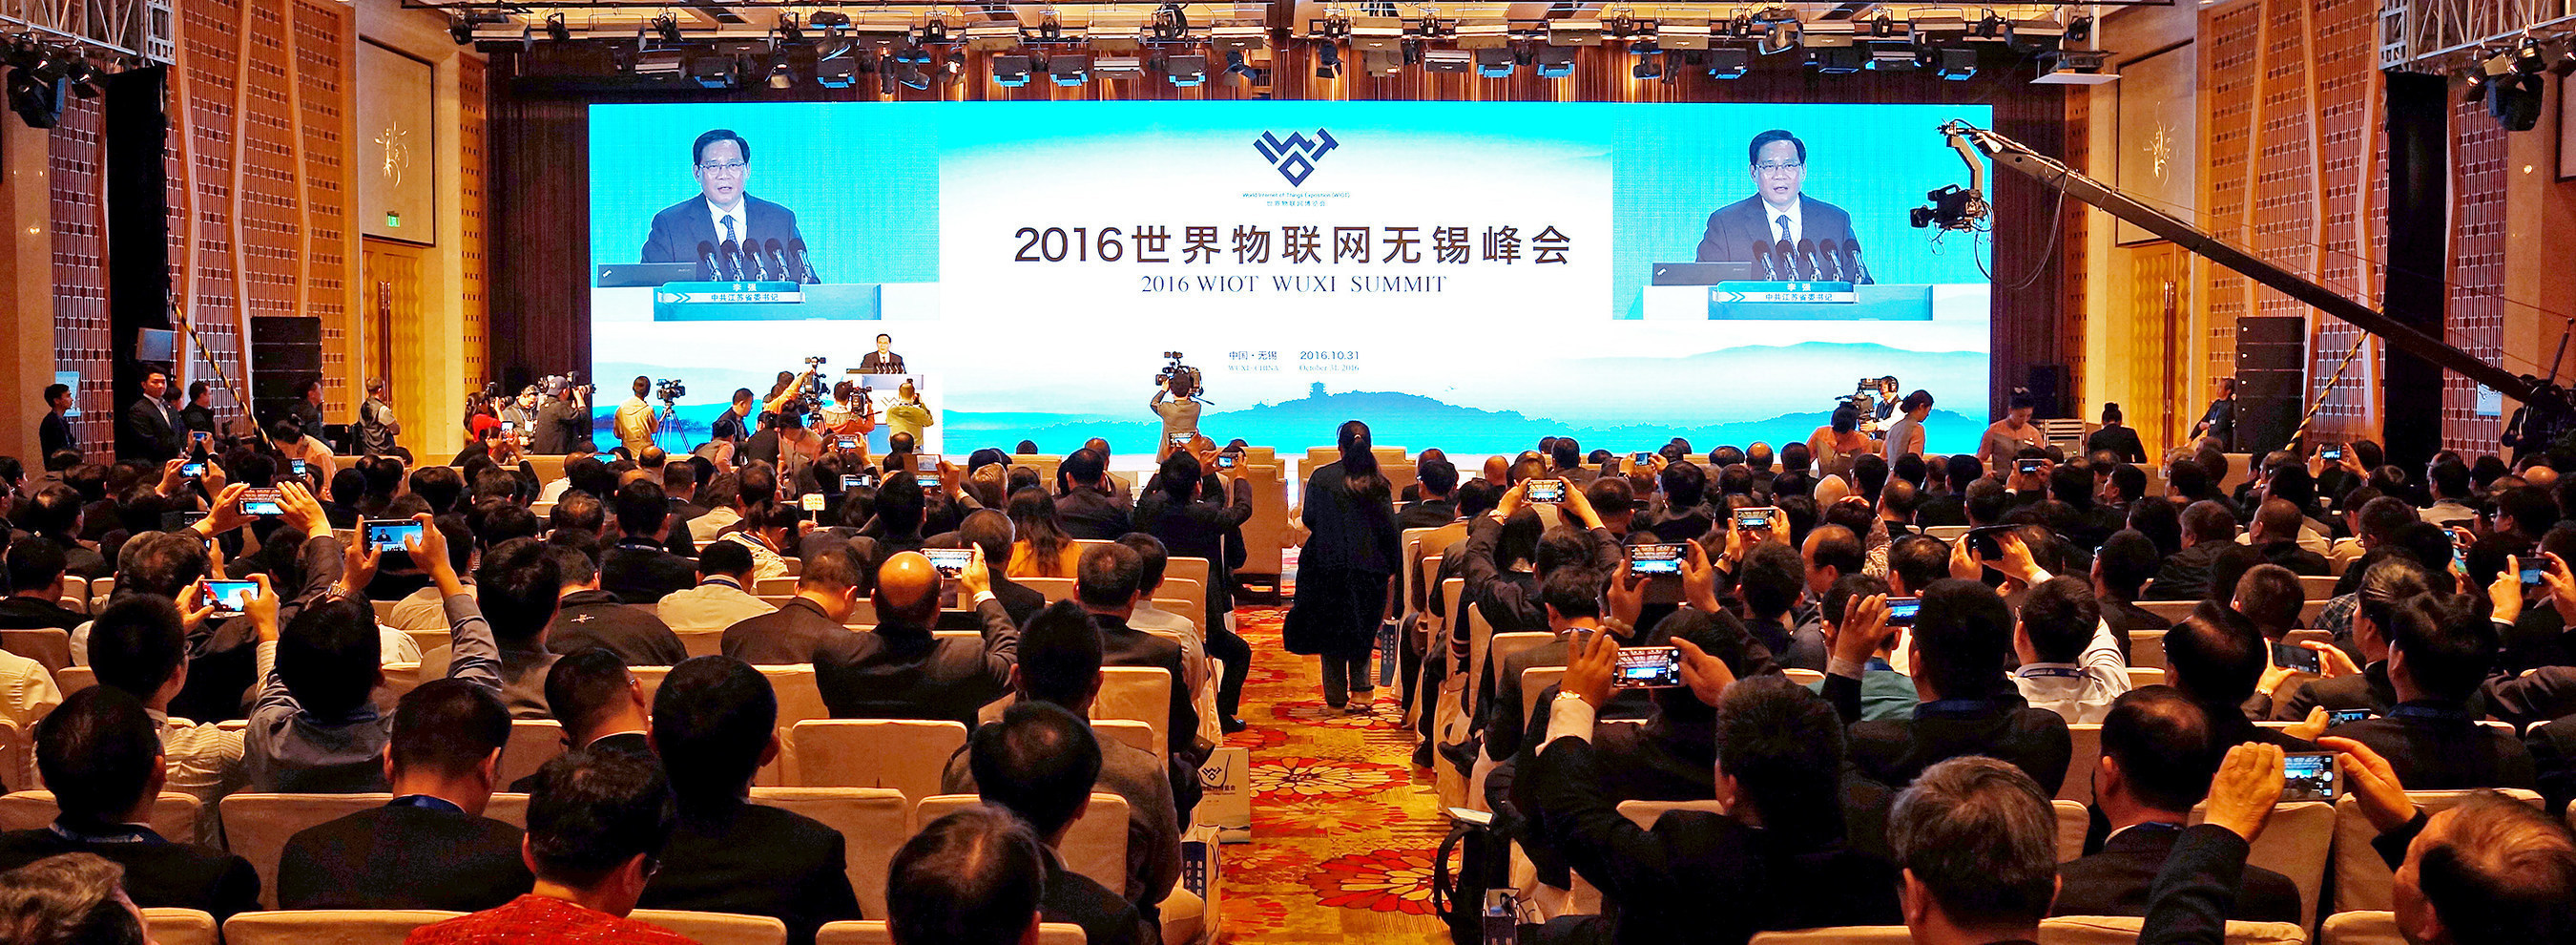 Secretary of a Provincial Party Committee of Jiangsu Province, Li Qiang giving speech at 2016 World Internet of Things Exposition.